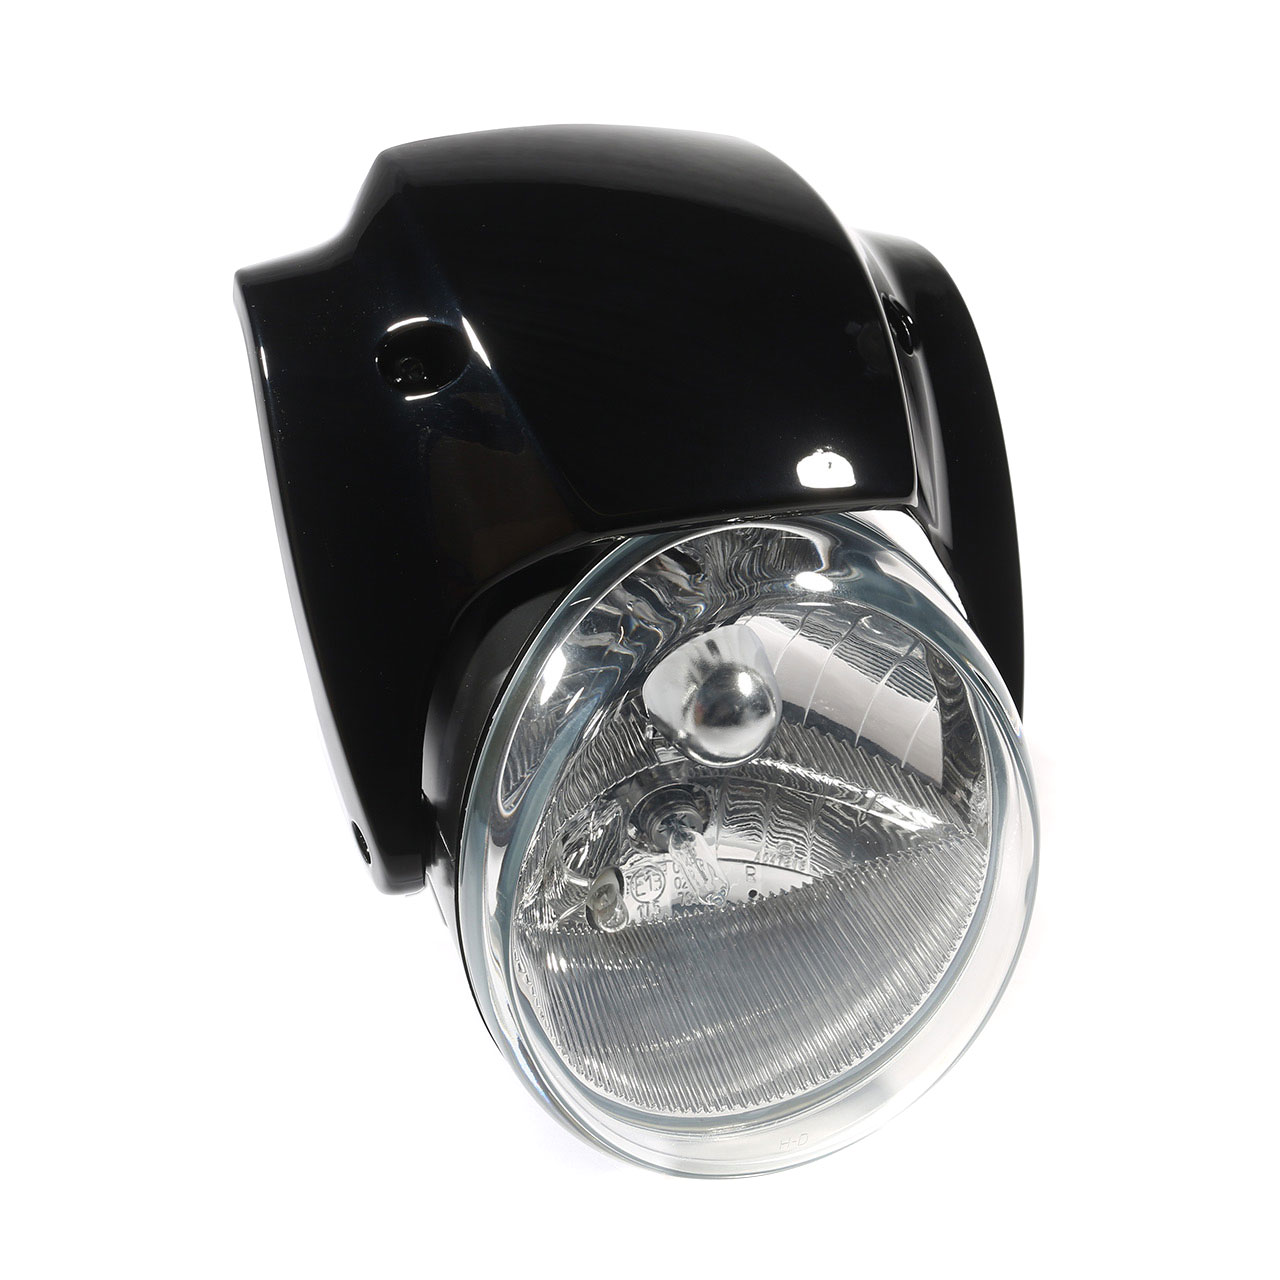 Headlight Kit Nightrod-Special for Softail Breakout 13-17 at